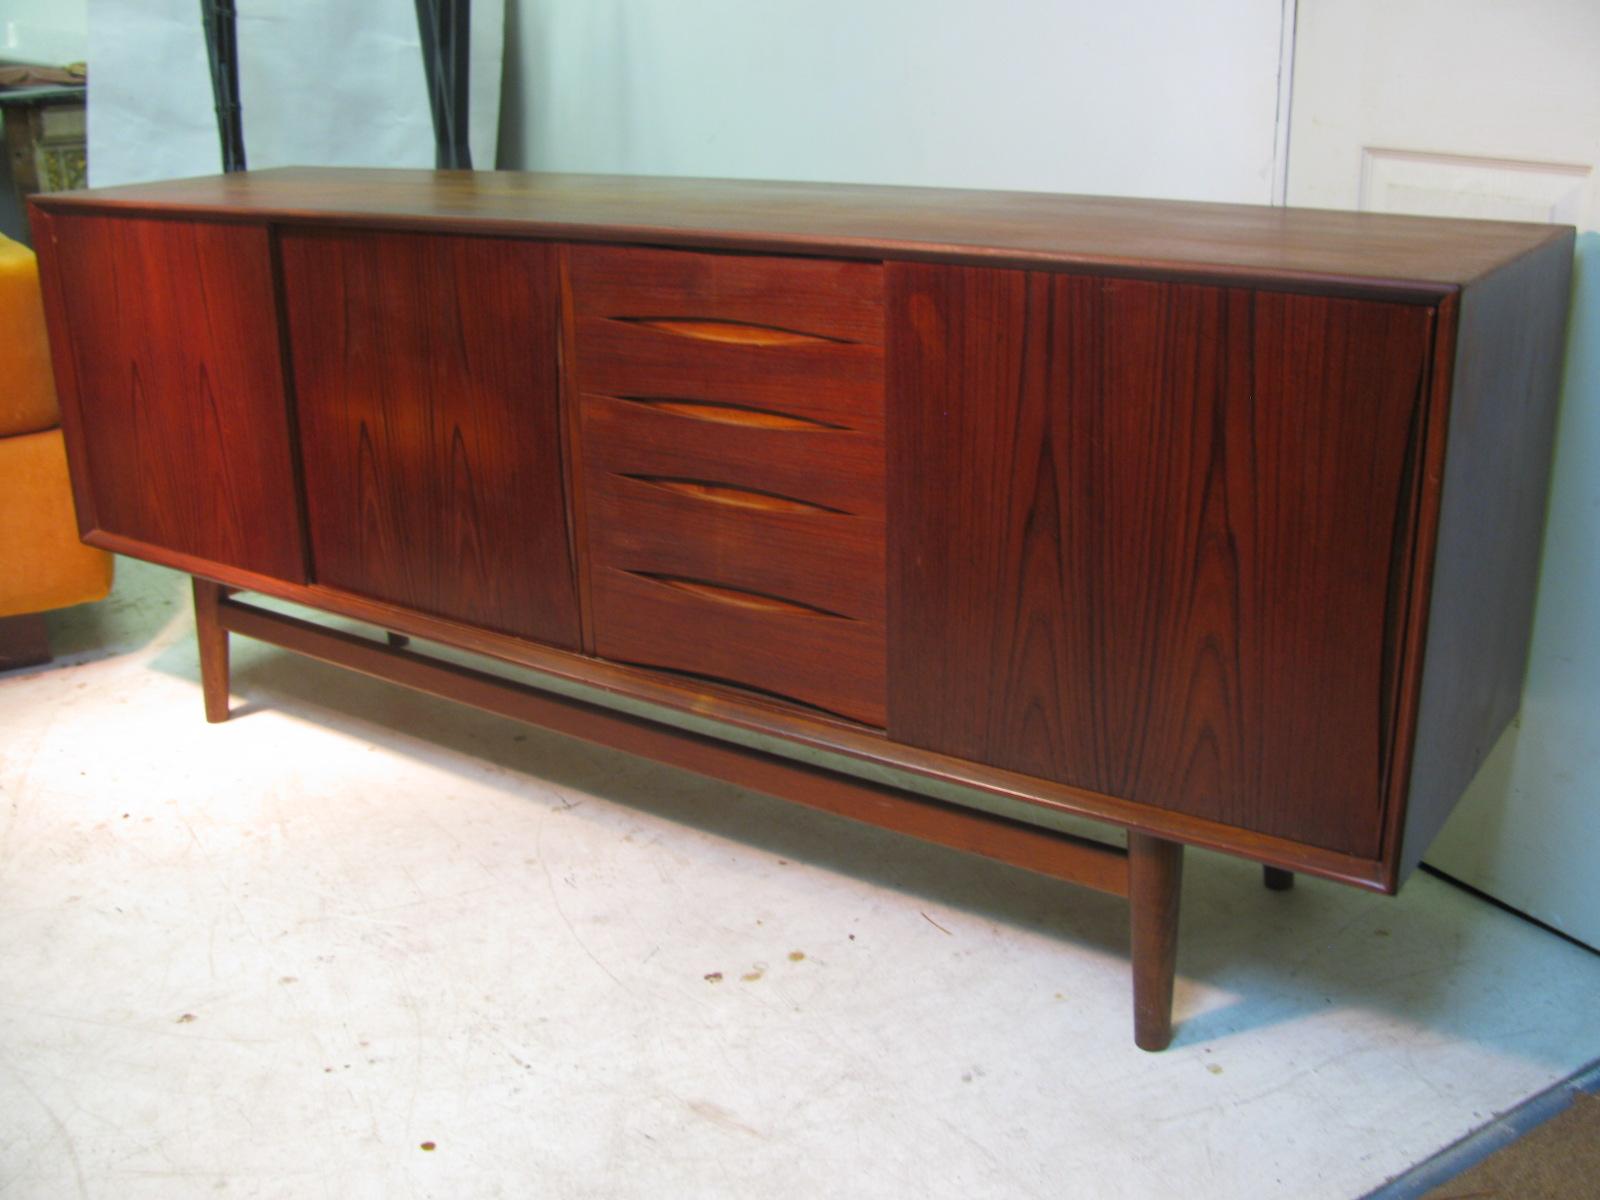 Beautiful vintage teak credenza with a rich and deep patina that has mellowed over the years. Three sliding doors which reveal a large and a small shelf along with five graduated drawers also for storage. Finger slots on all doors and drawers